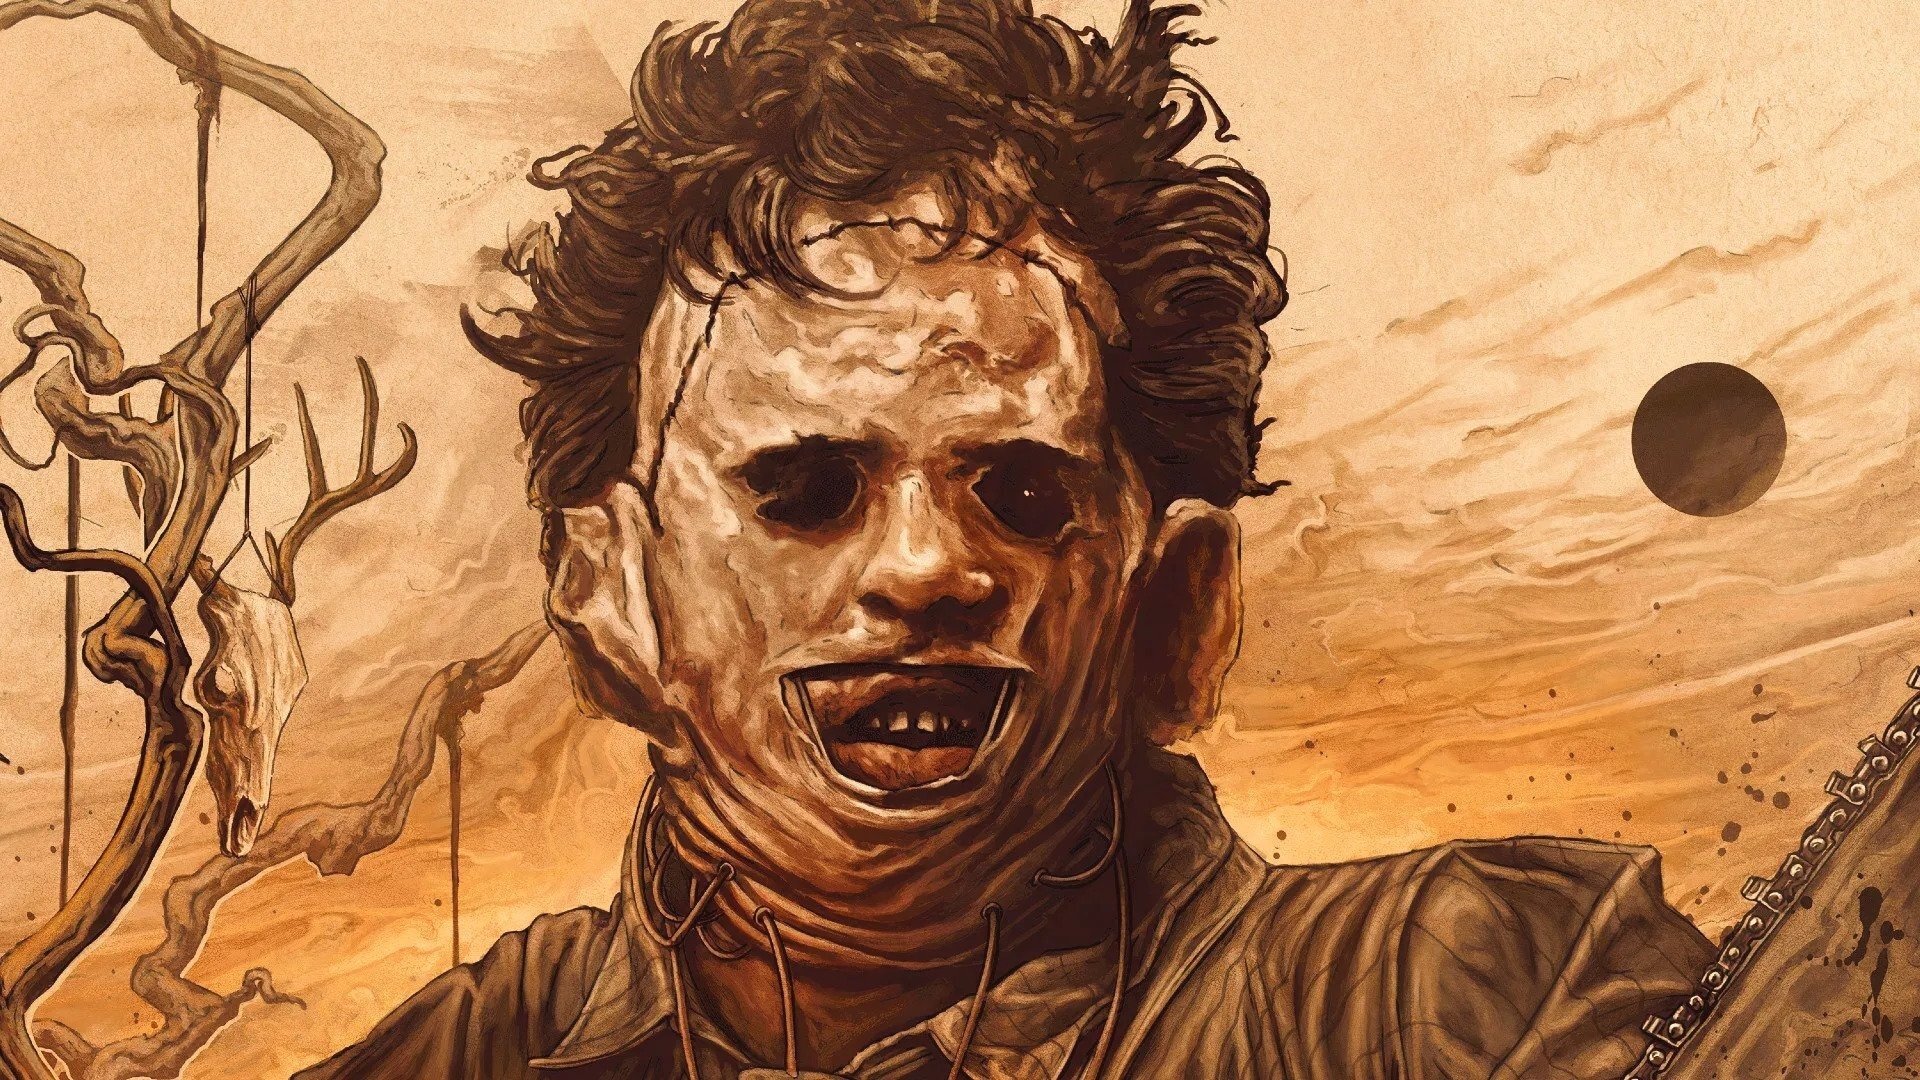 Texas Chain Saw Massacre dev says millions of potential Game Pass players “is paramount”